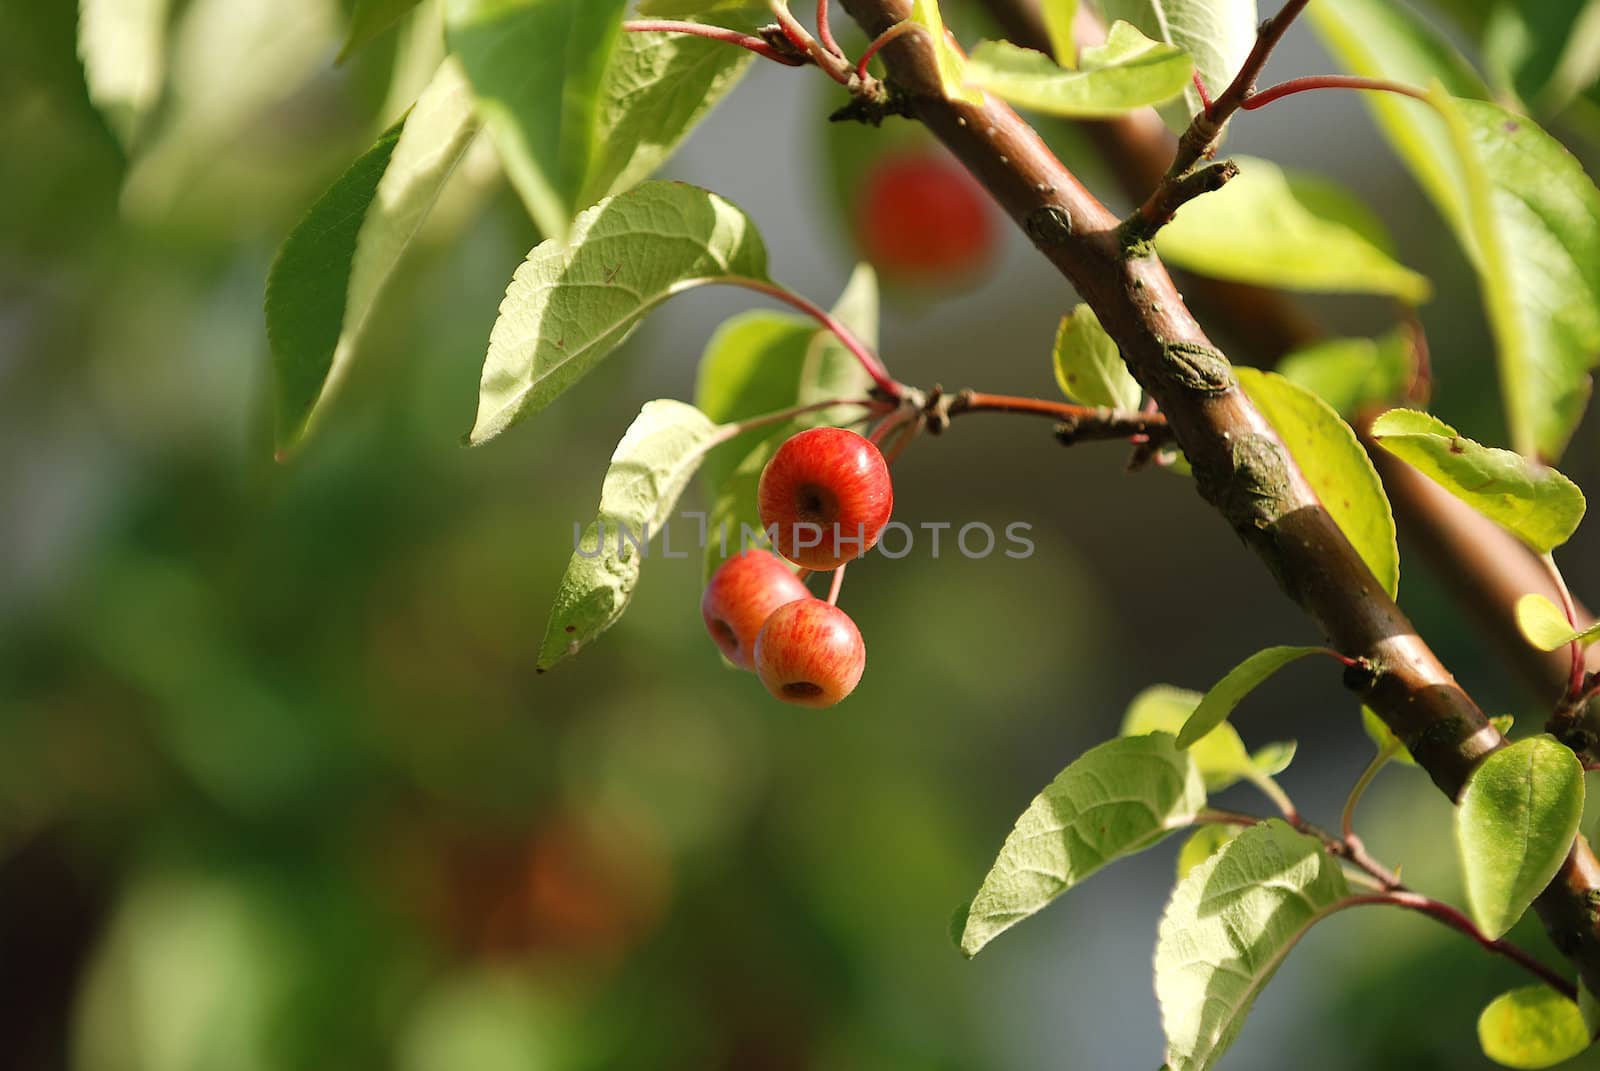 Crab apples on the branch in bright sunlight